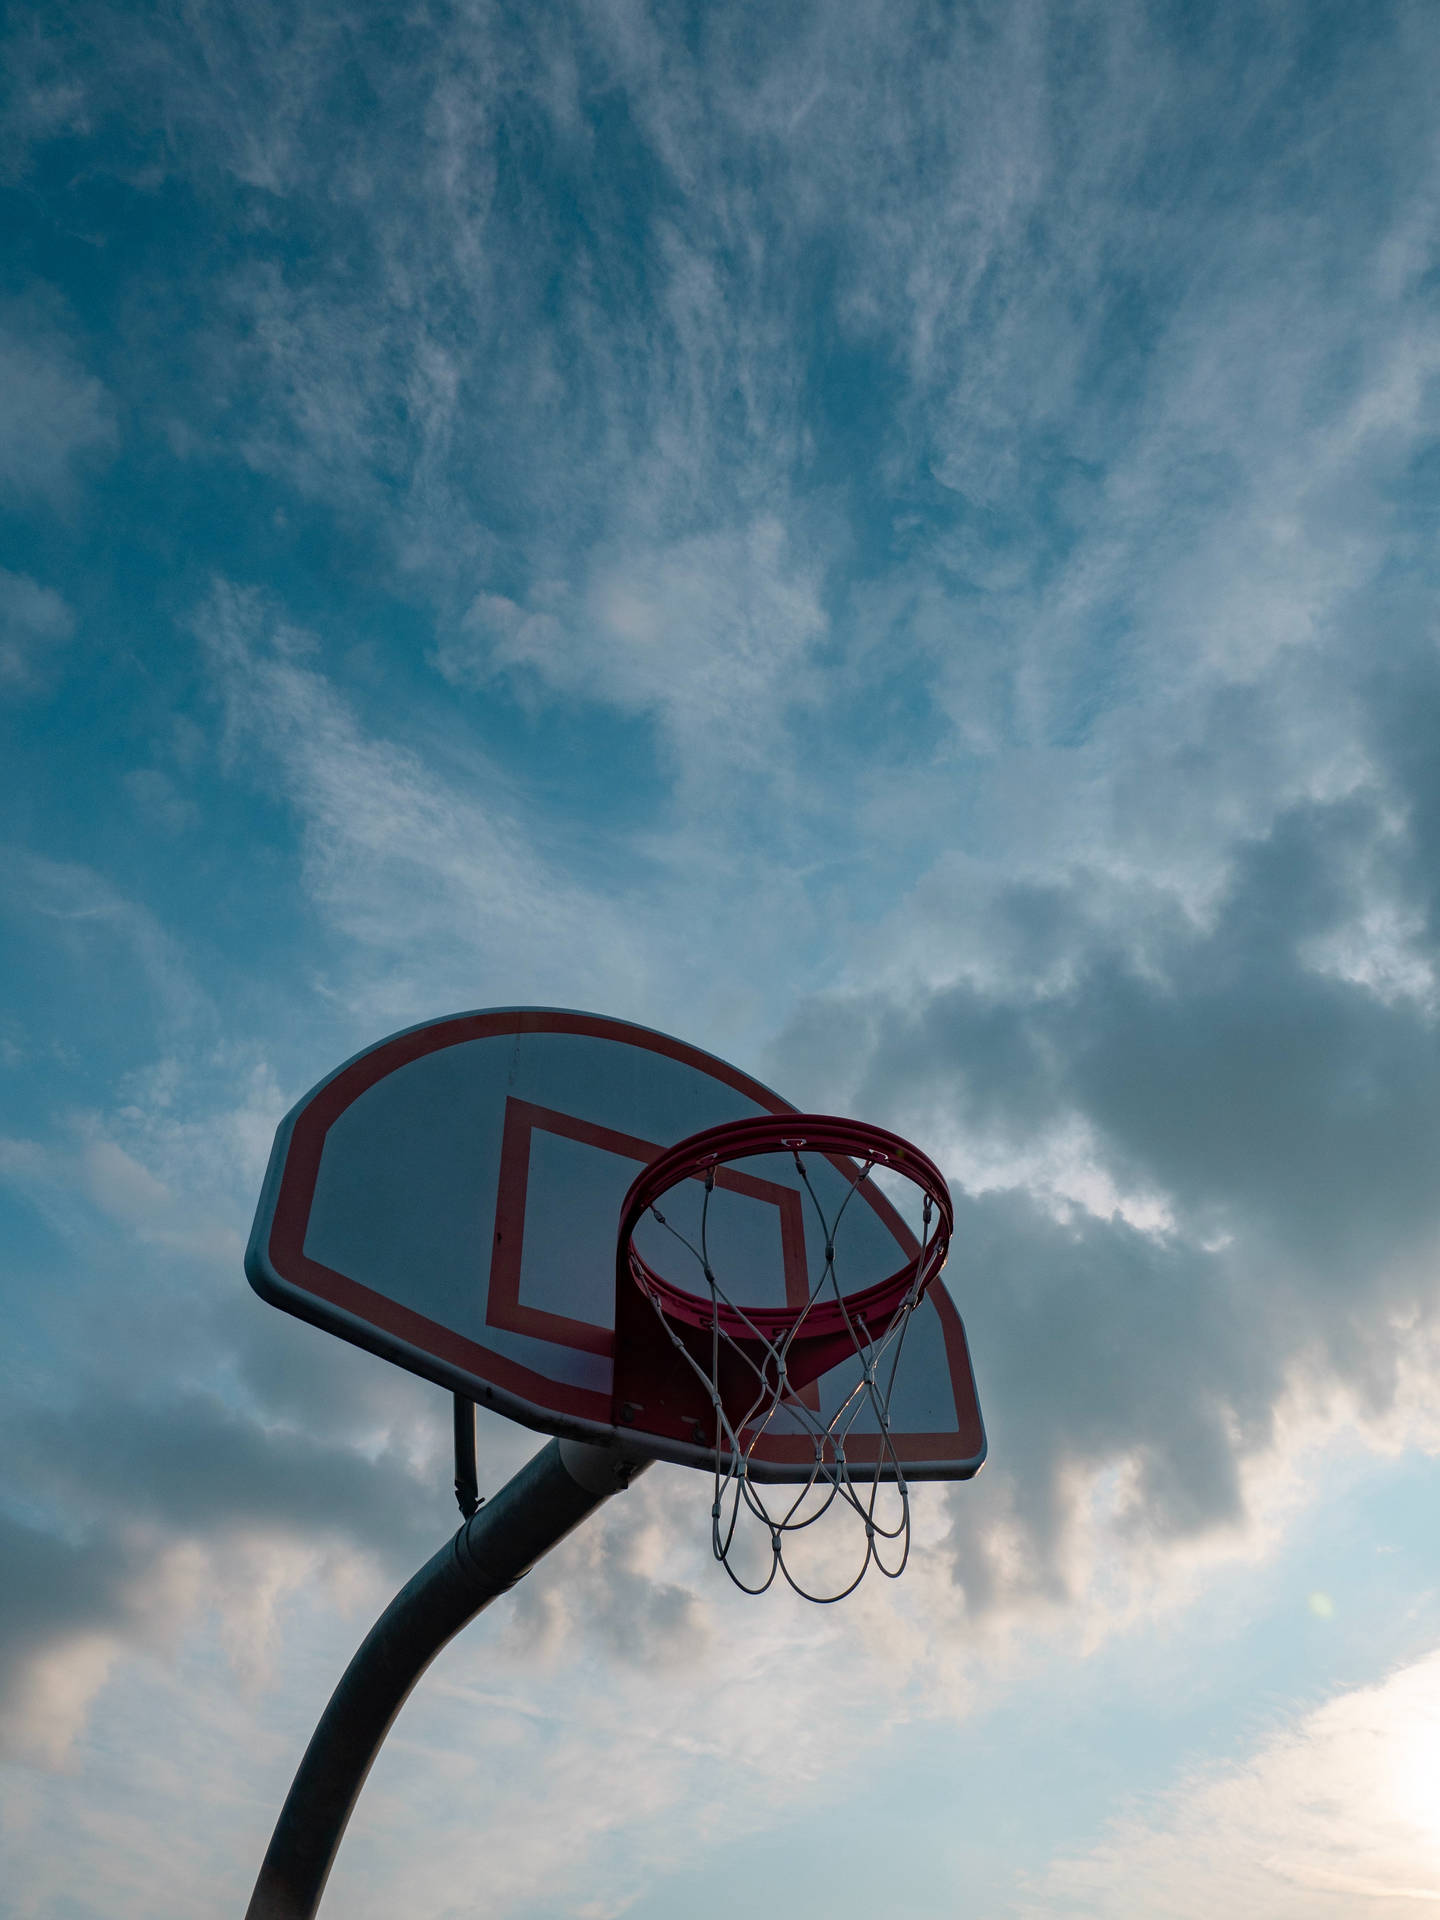 Basketball 3888X5184 Wallpaper and Background Image